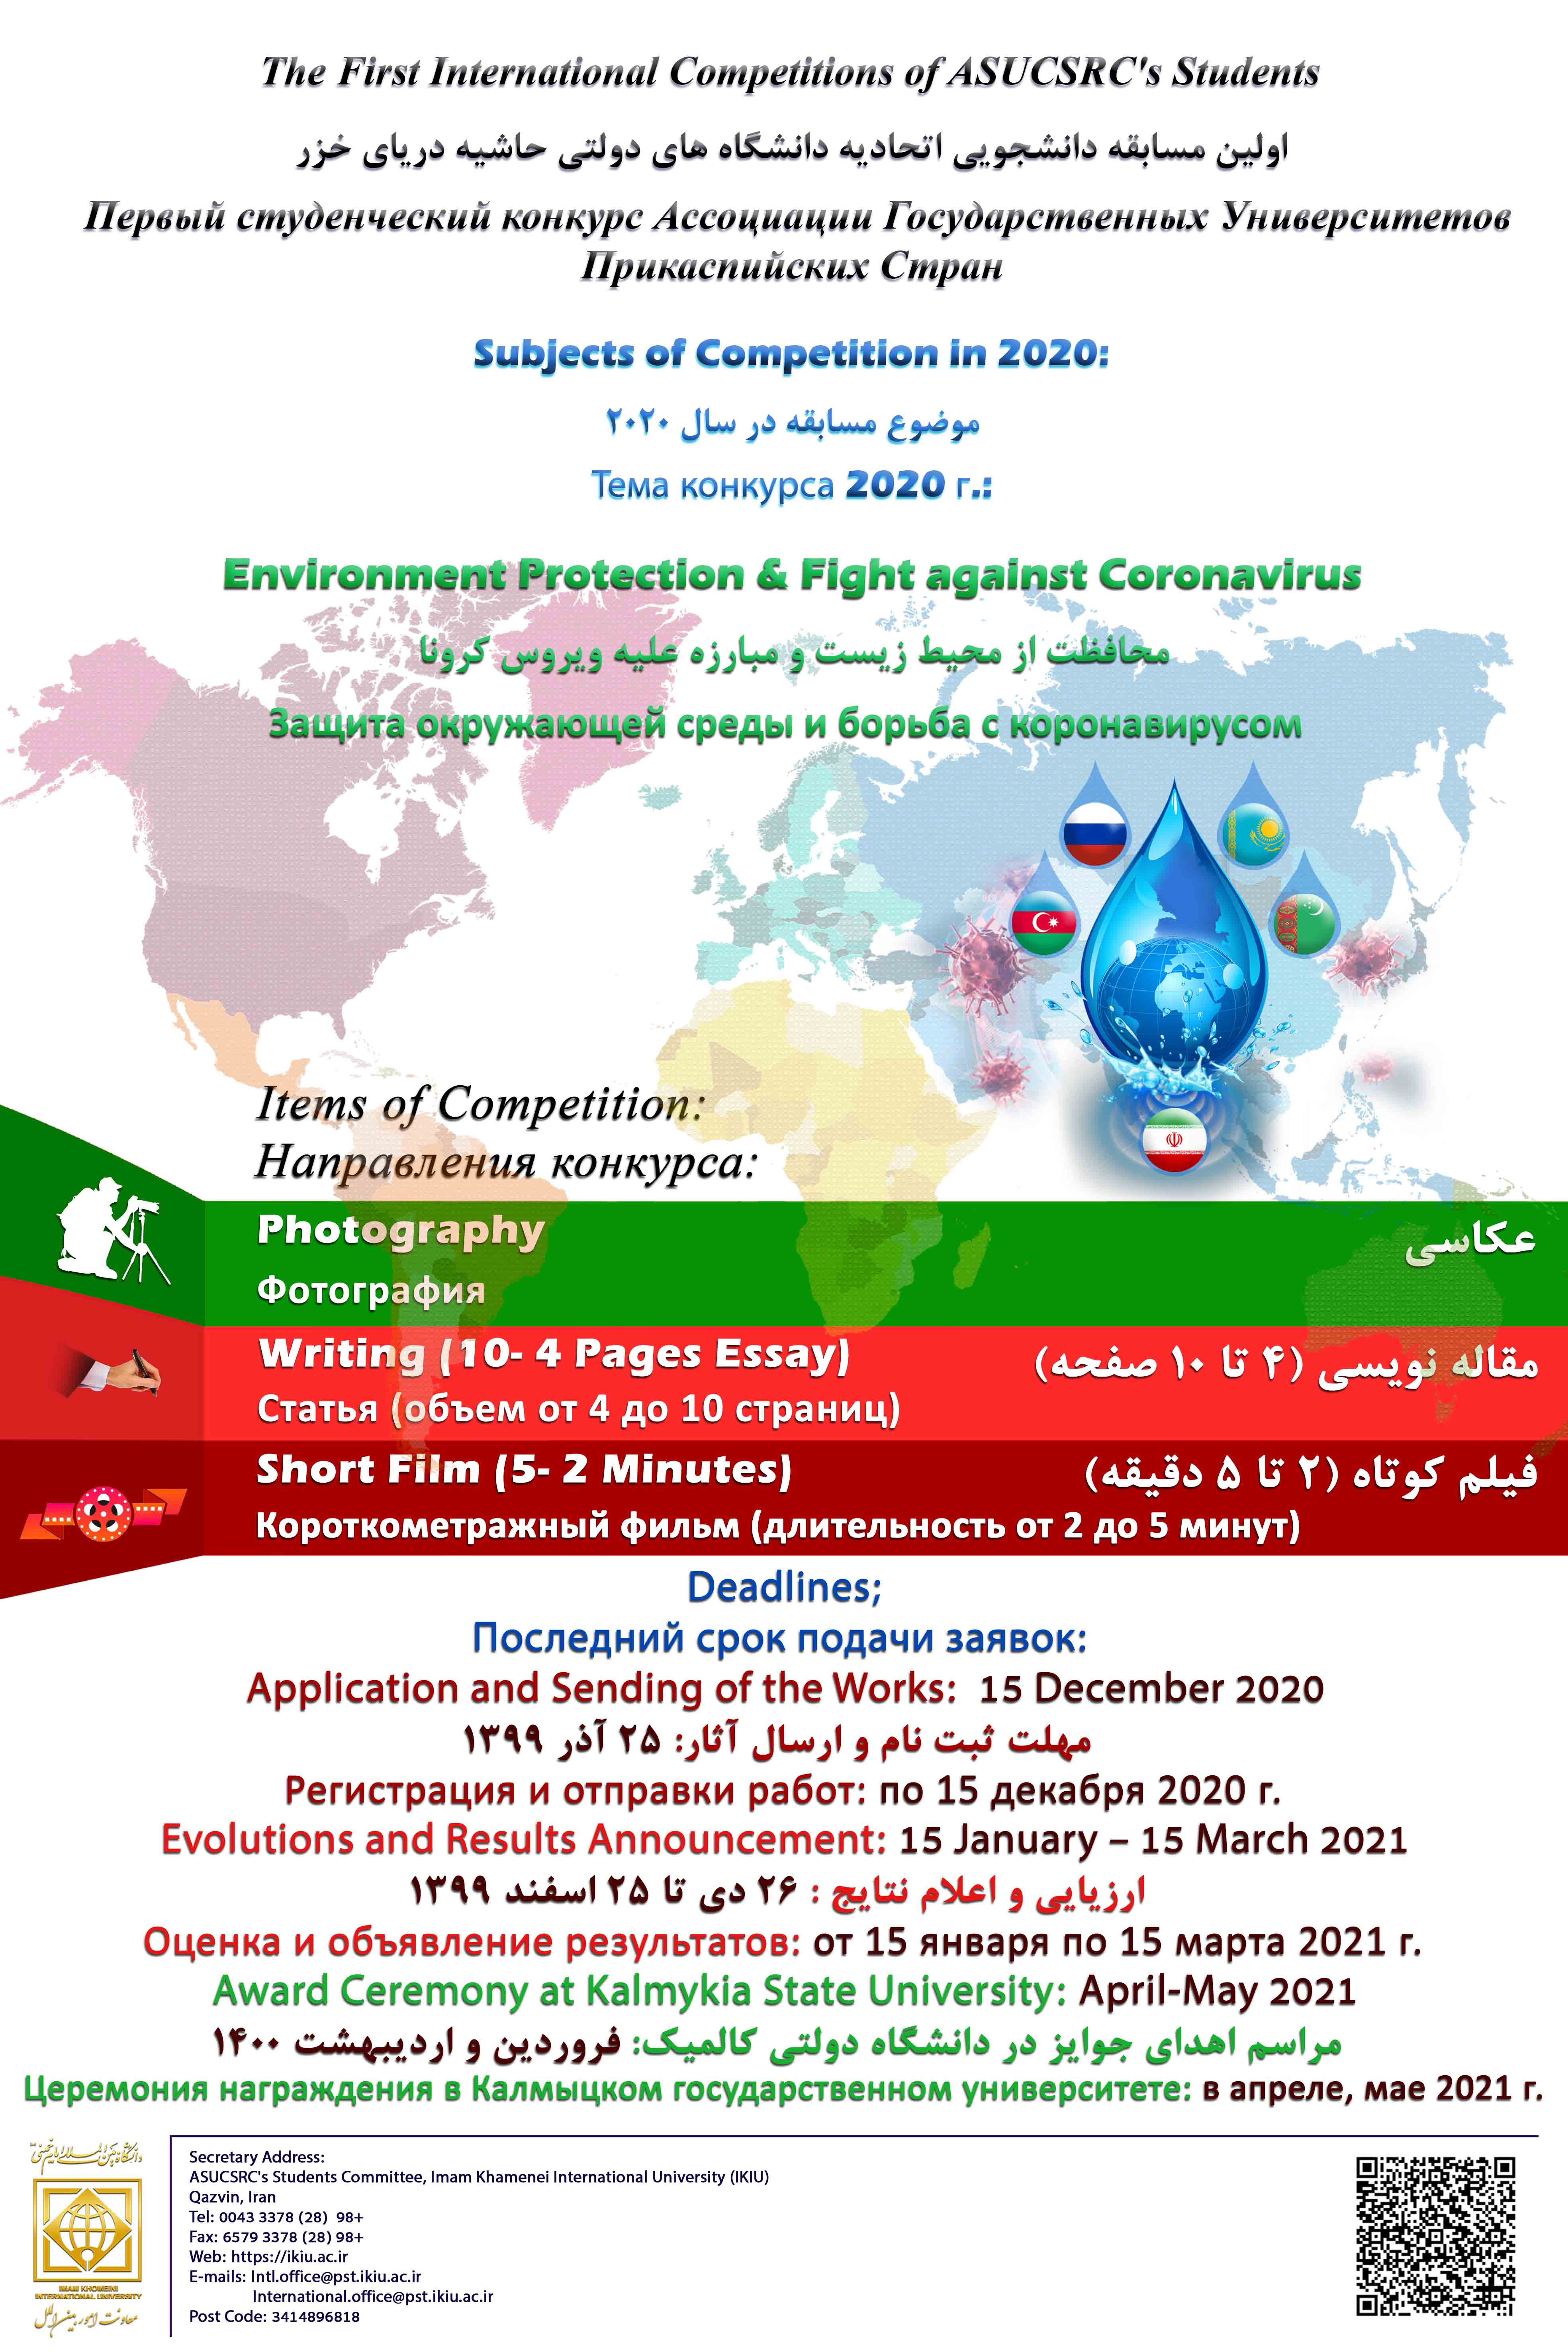 The First International Competition of ASUCRC’s Students on “Environmental Protection & Fight against Coronavirus”